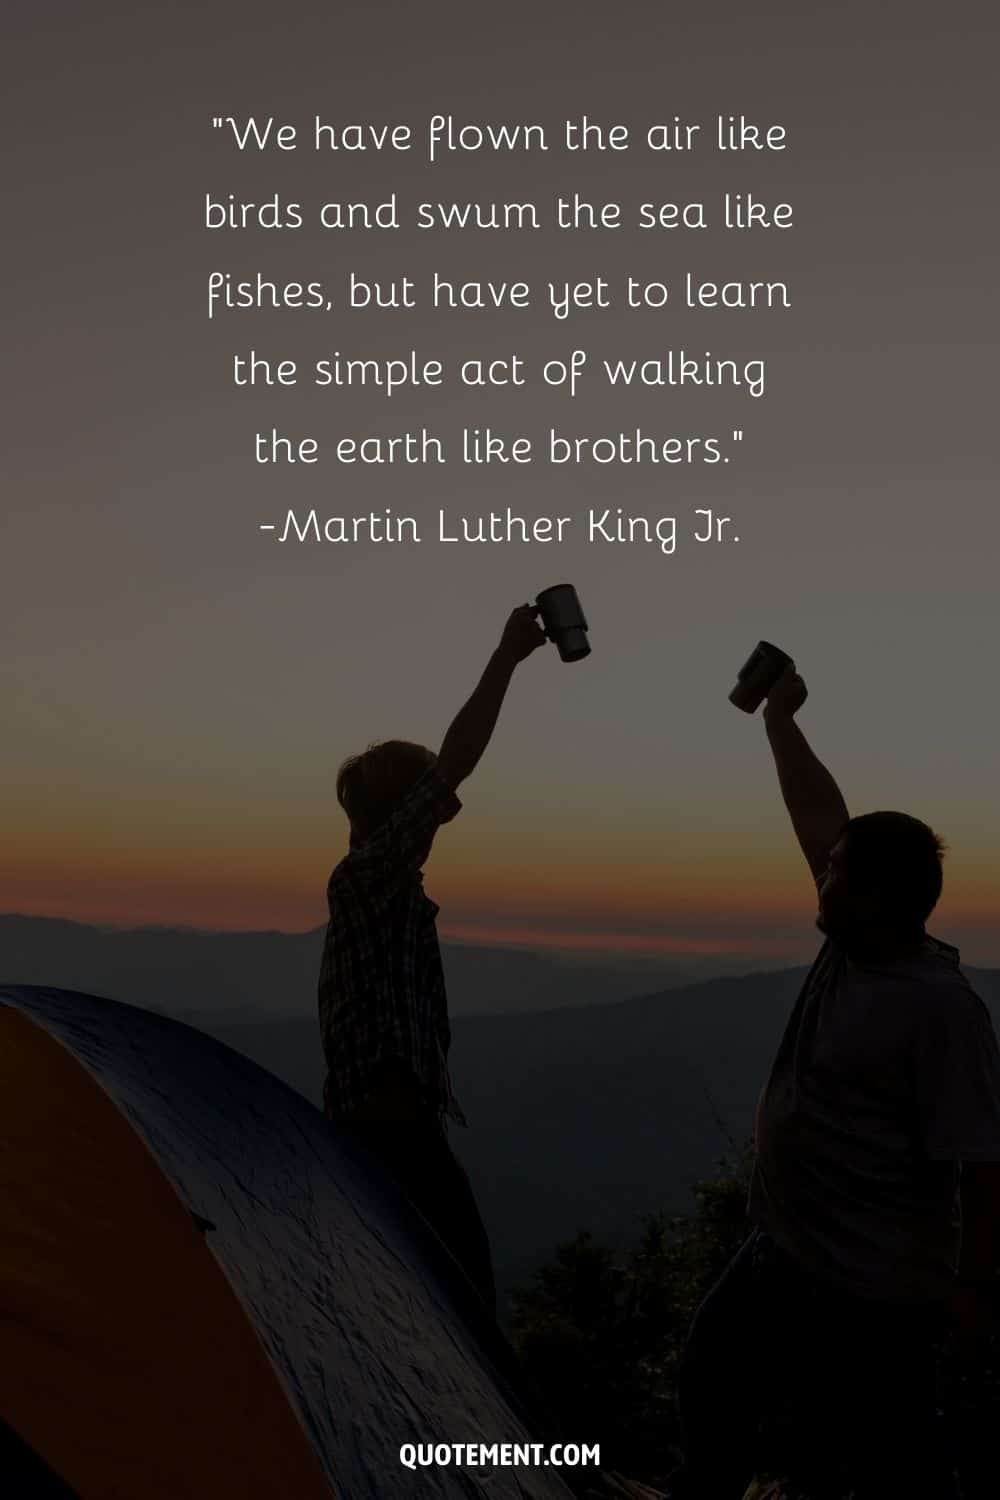 “We have flown the air like birds and swum the sea like fishes, but have yet to learn the simple act of walking the earth like brothers.” — Martin Luther King Jr.